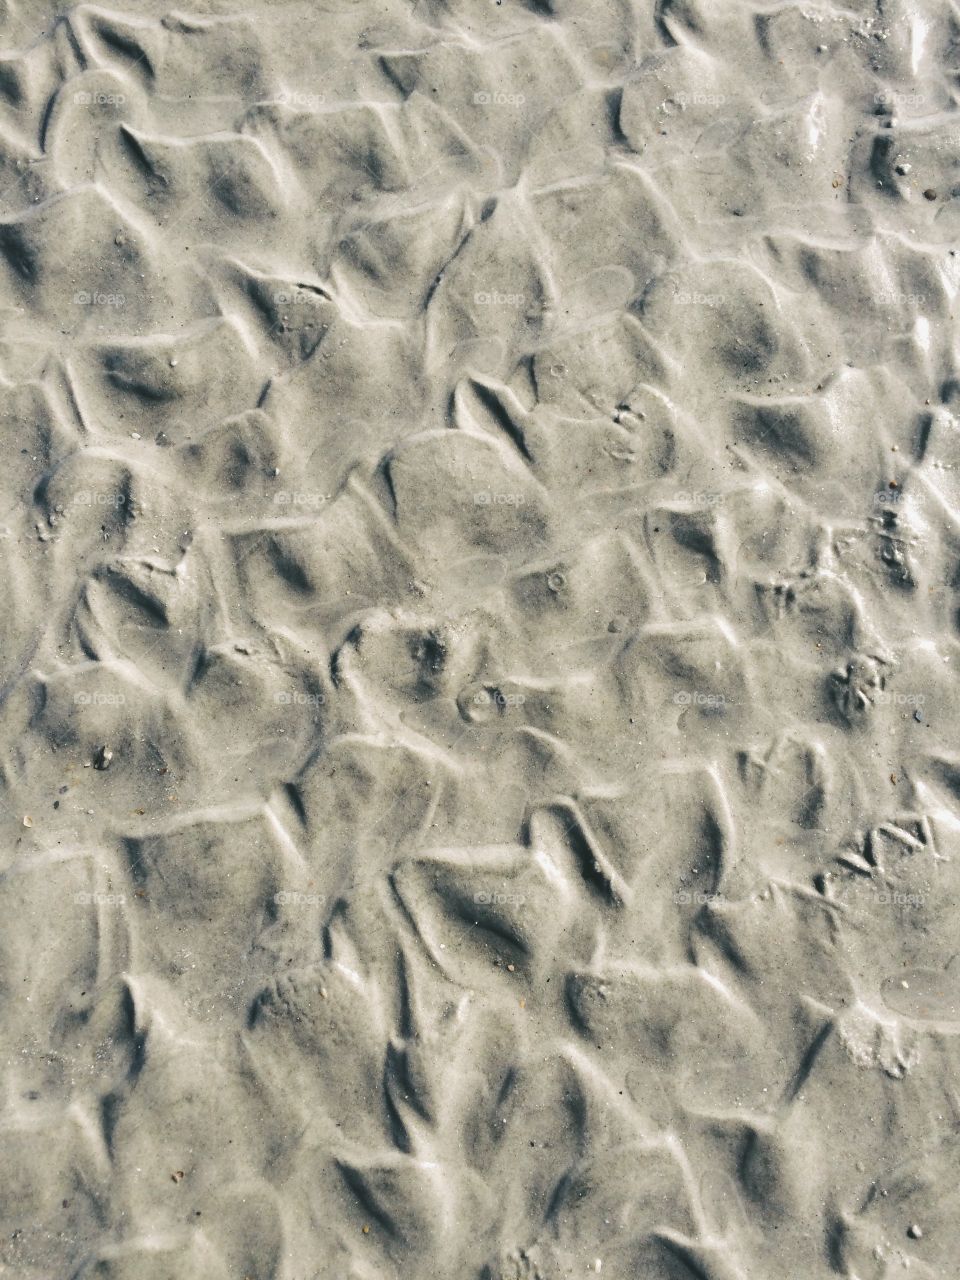 Ripples in the sand.